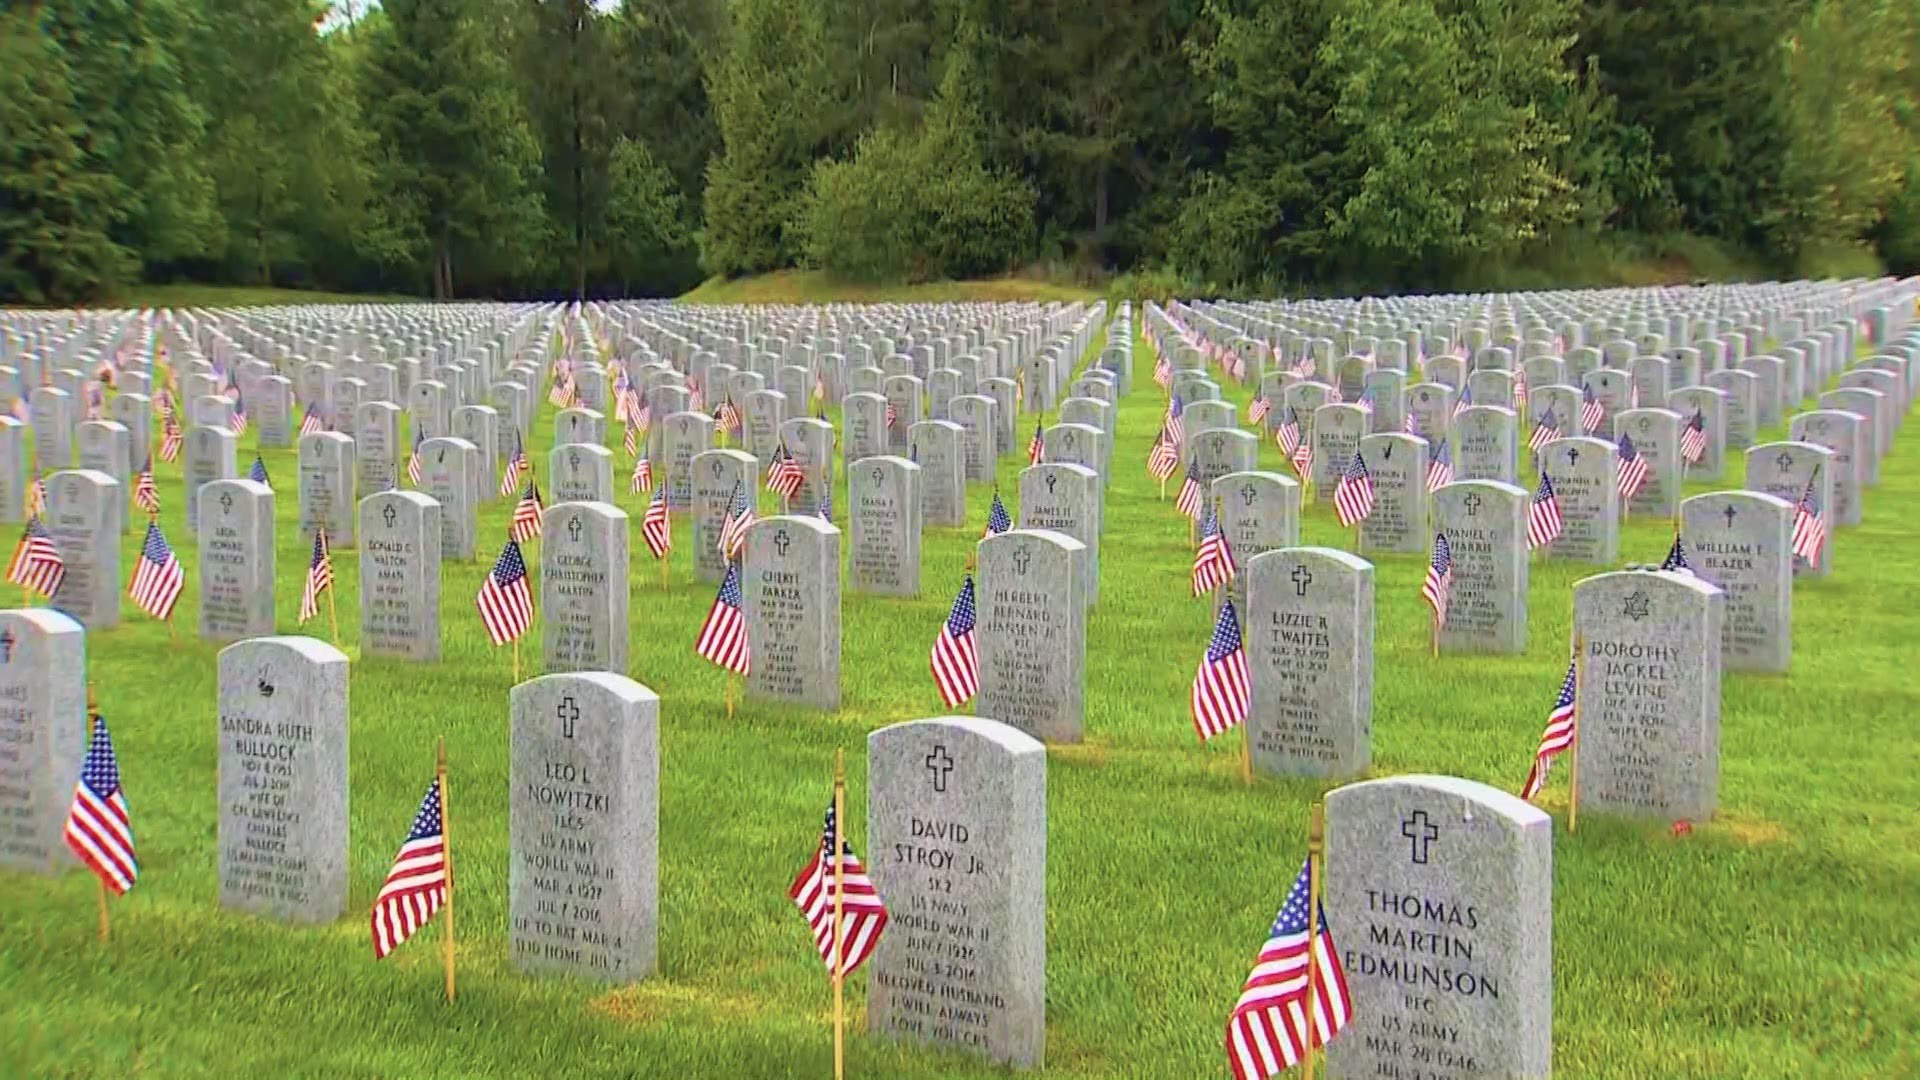 Old Glory lined the rows of graves for America's fallen heroes at Mountain View Cemetery in Lakewood ahead of Memorial Day.